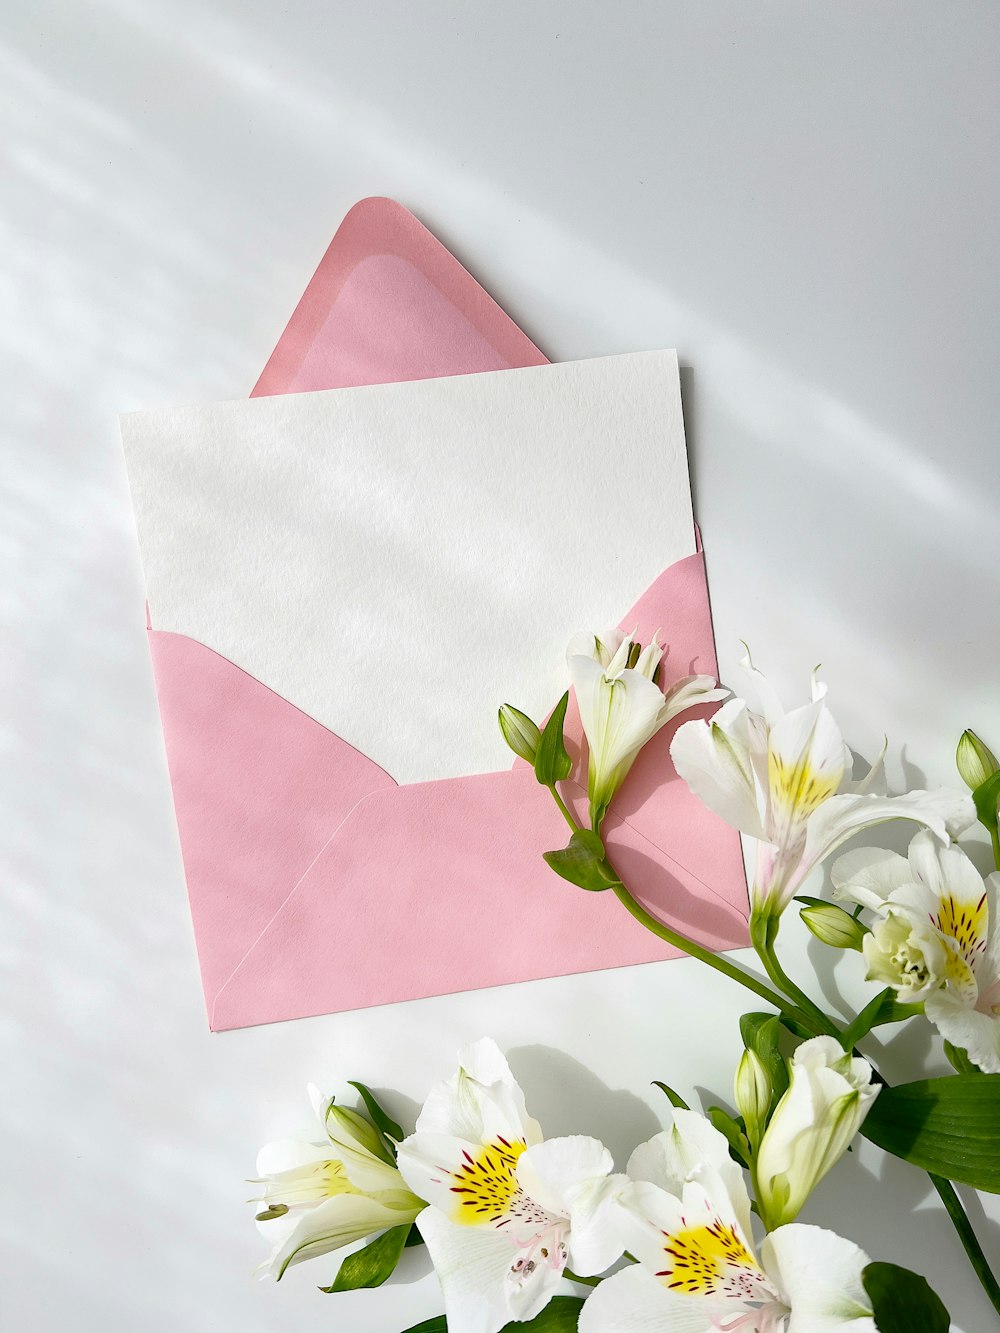 a pink envelope and white flowers on a white table